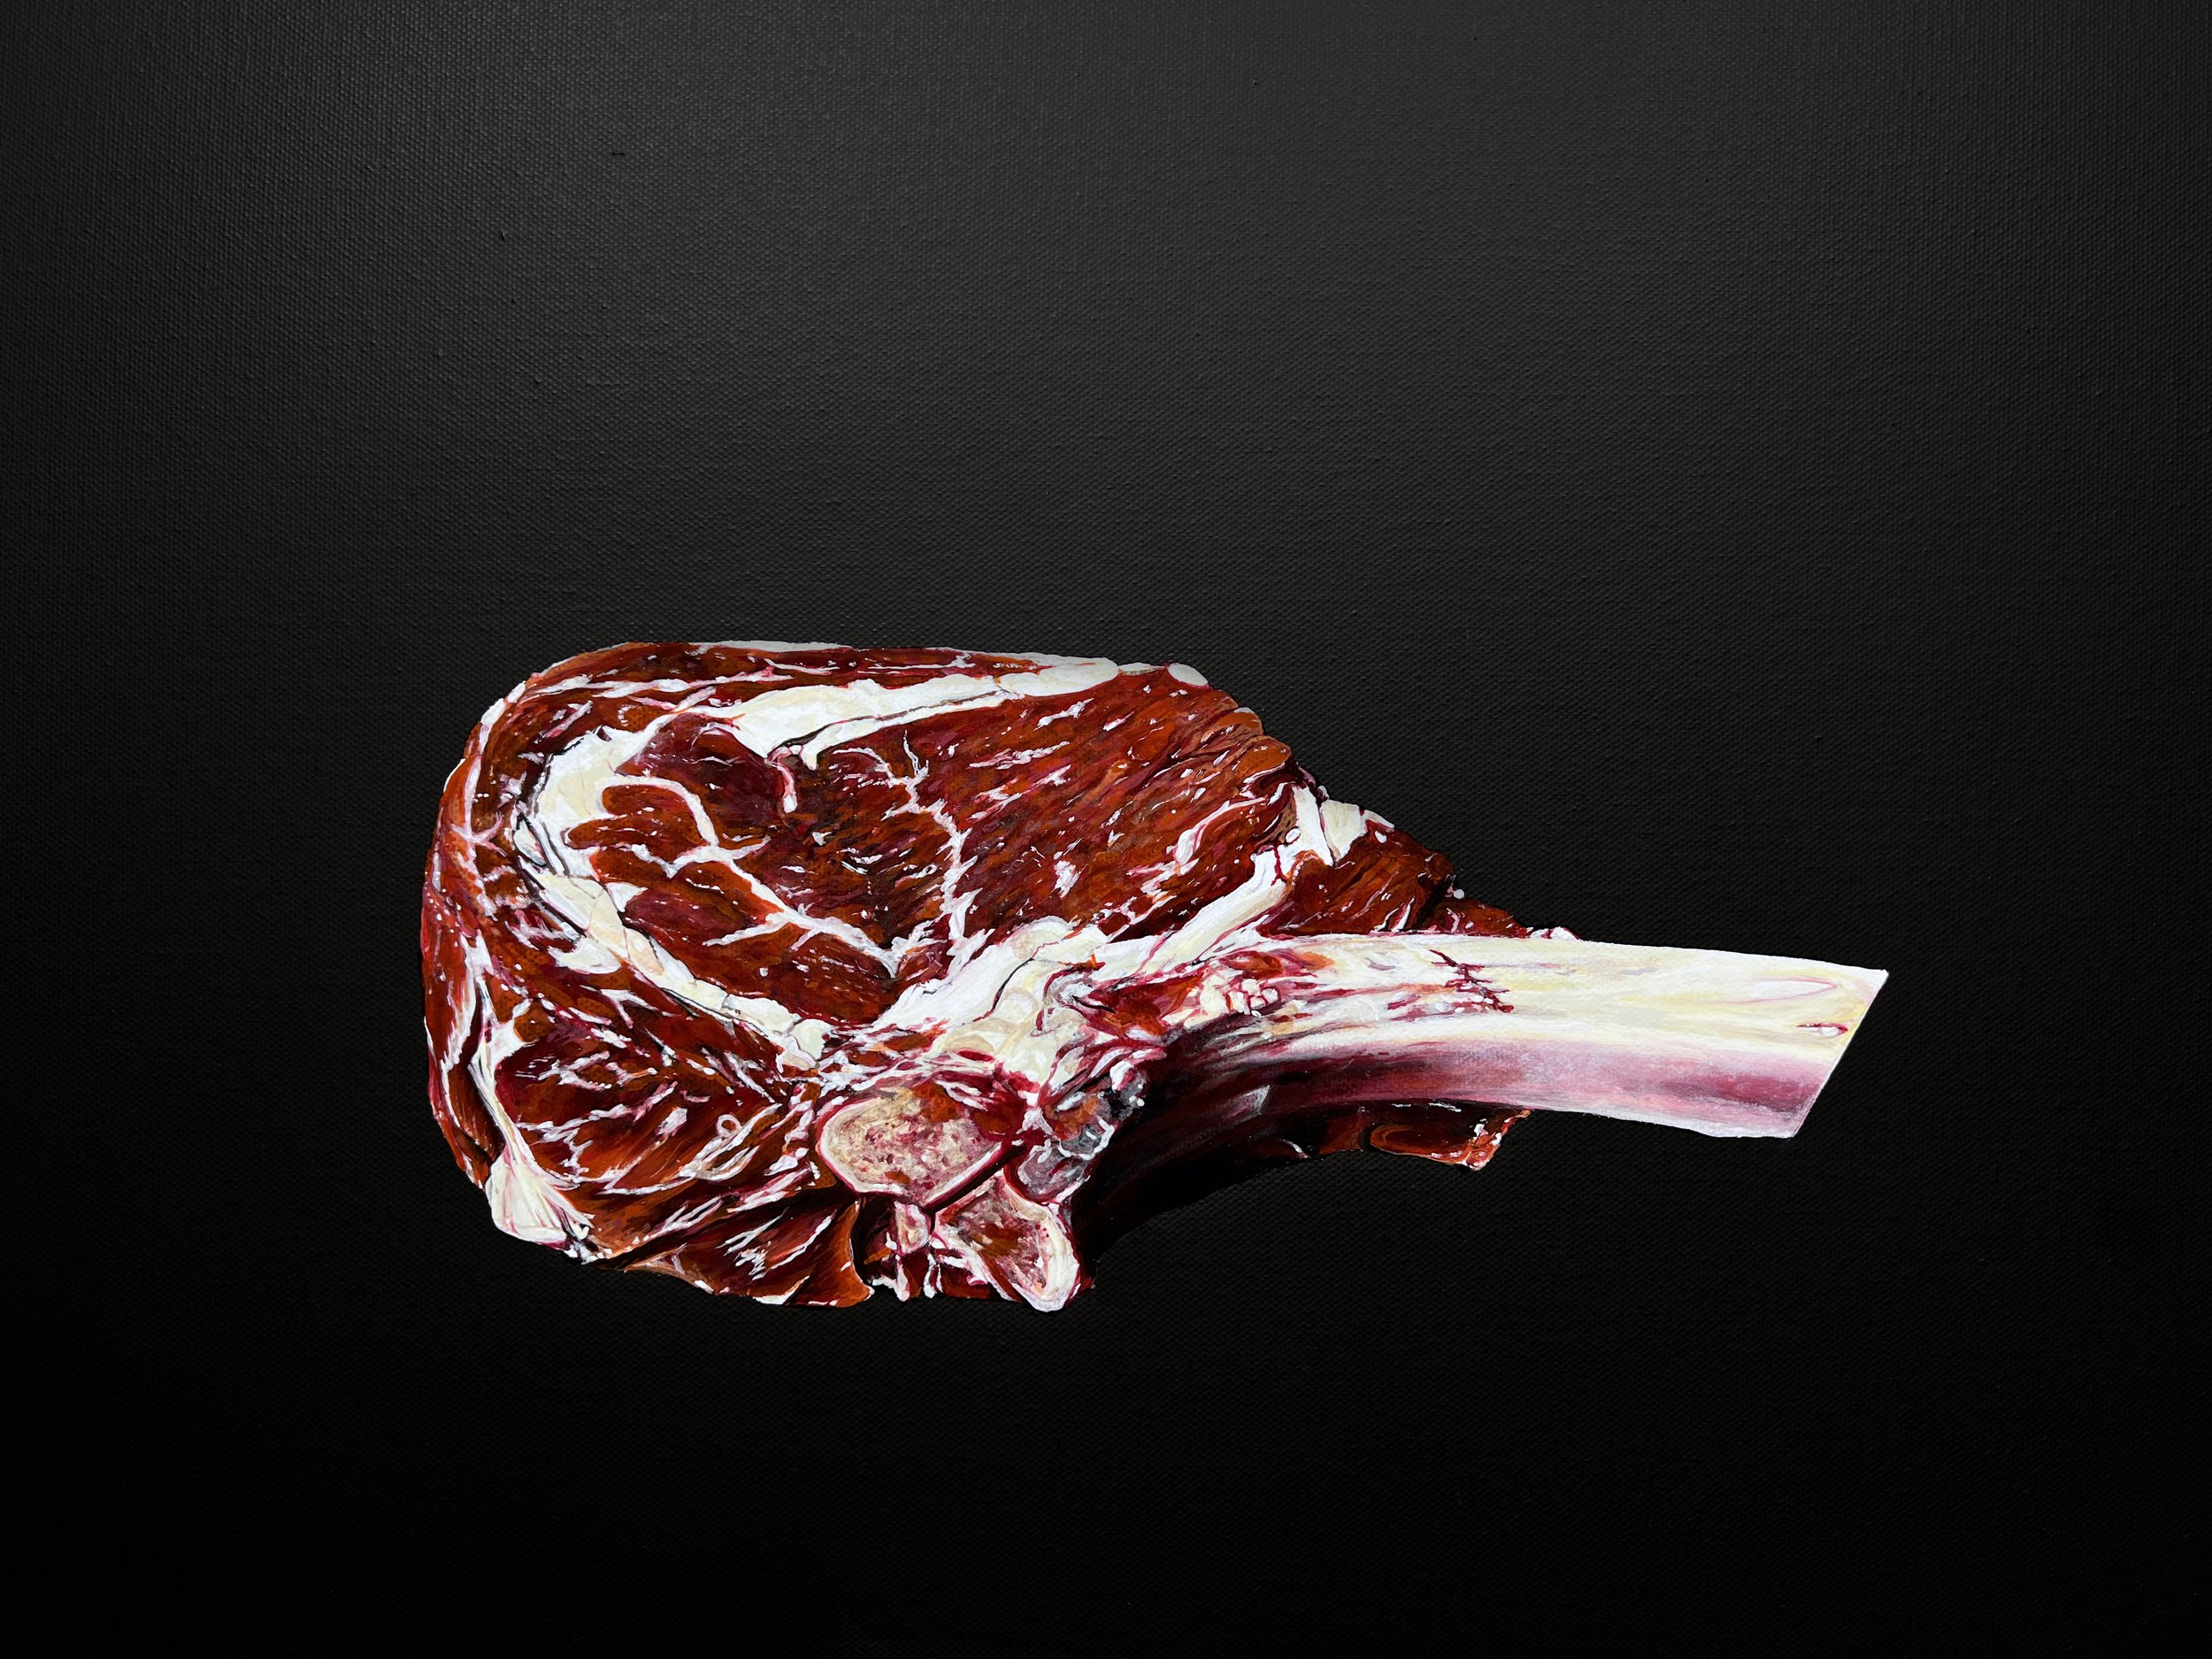   Cow (for Joan) , 2022 Oil on panel 18 x 24 inches (46cm x 61cm) 